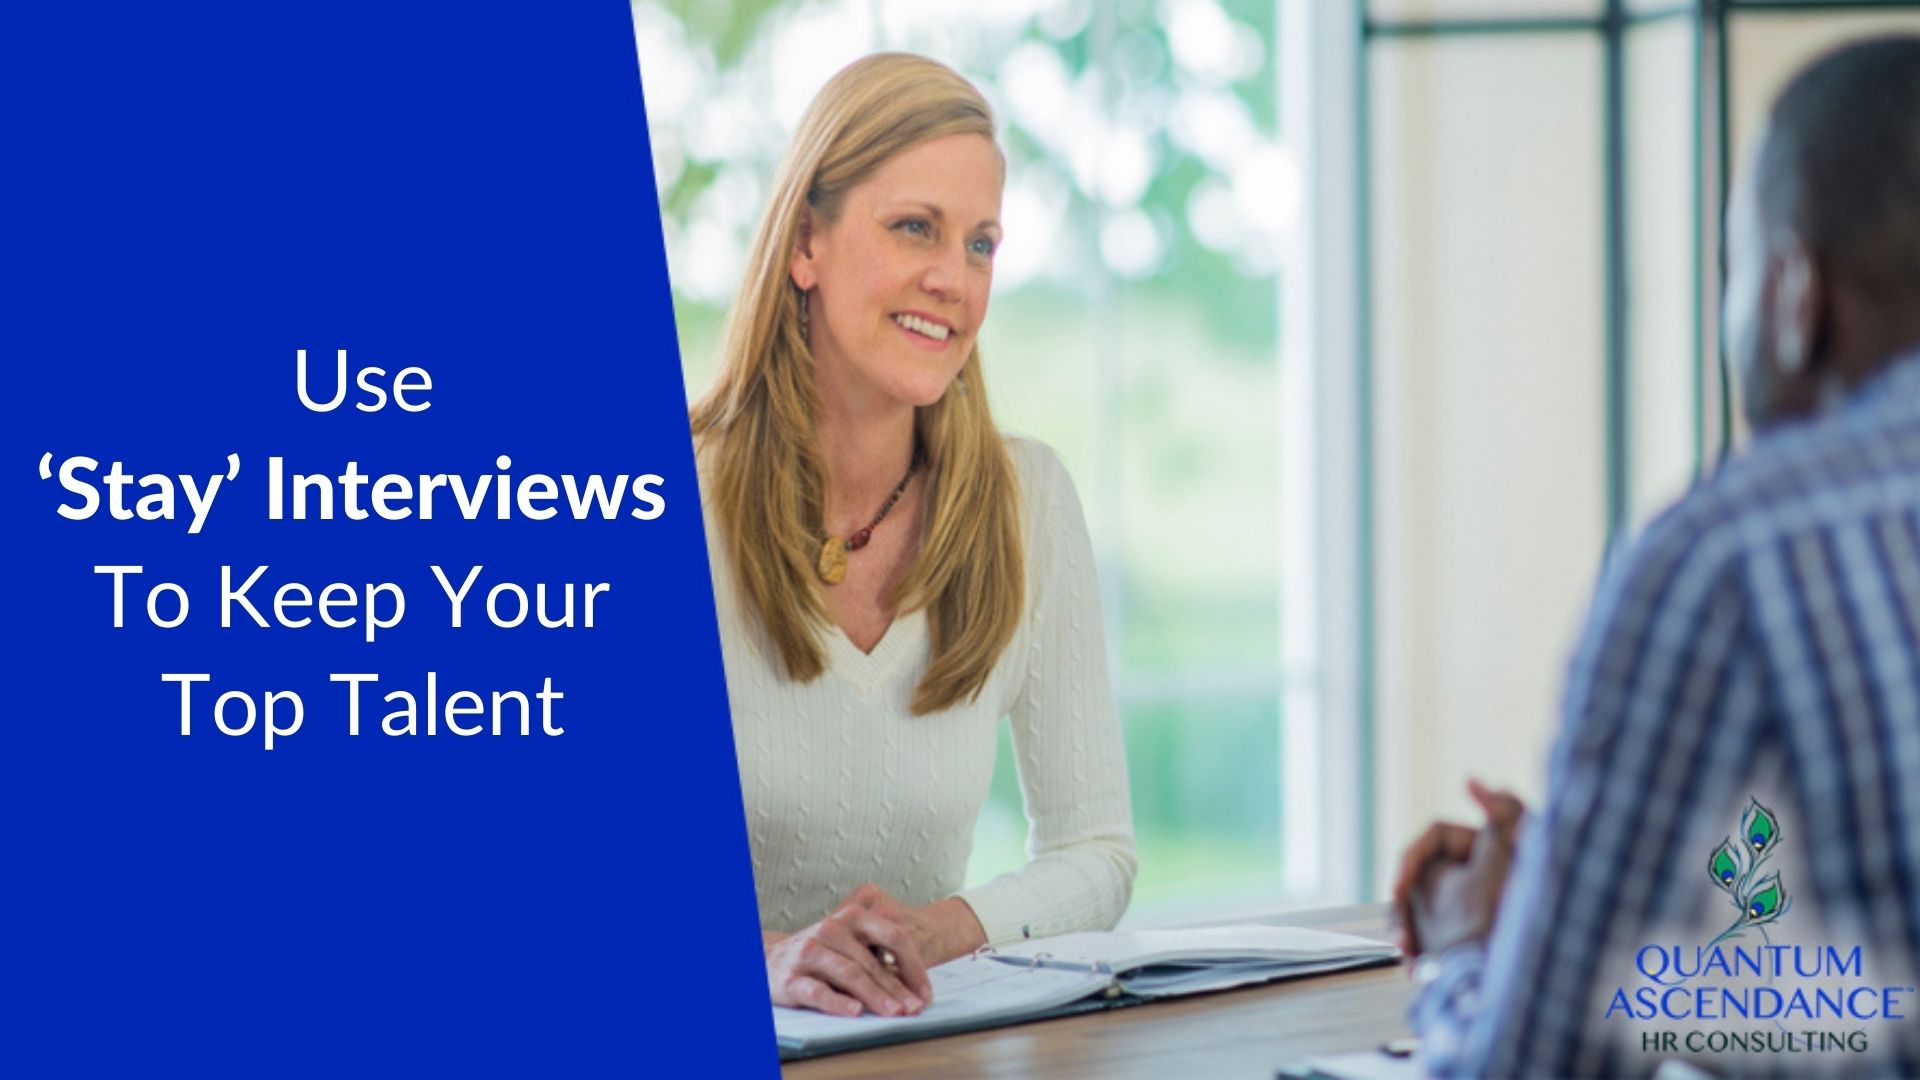 How To Use ‘Stay’ Interviews To Keep Your Top Talent